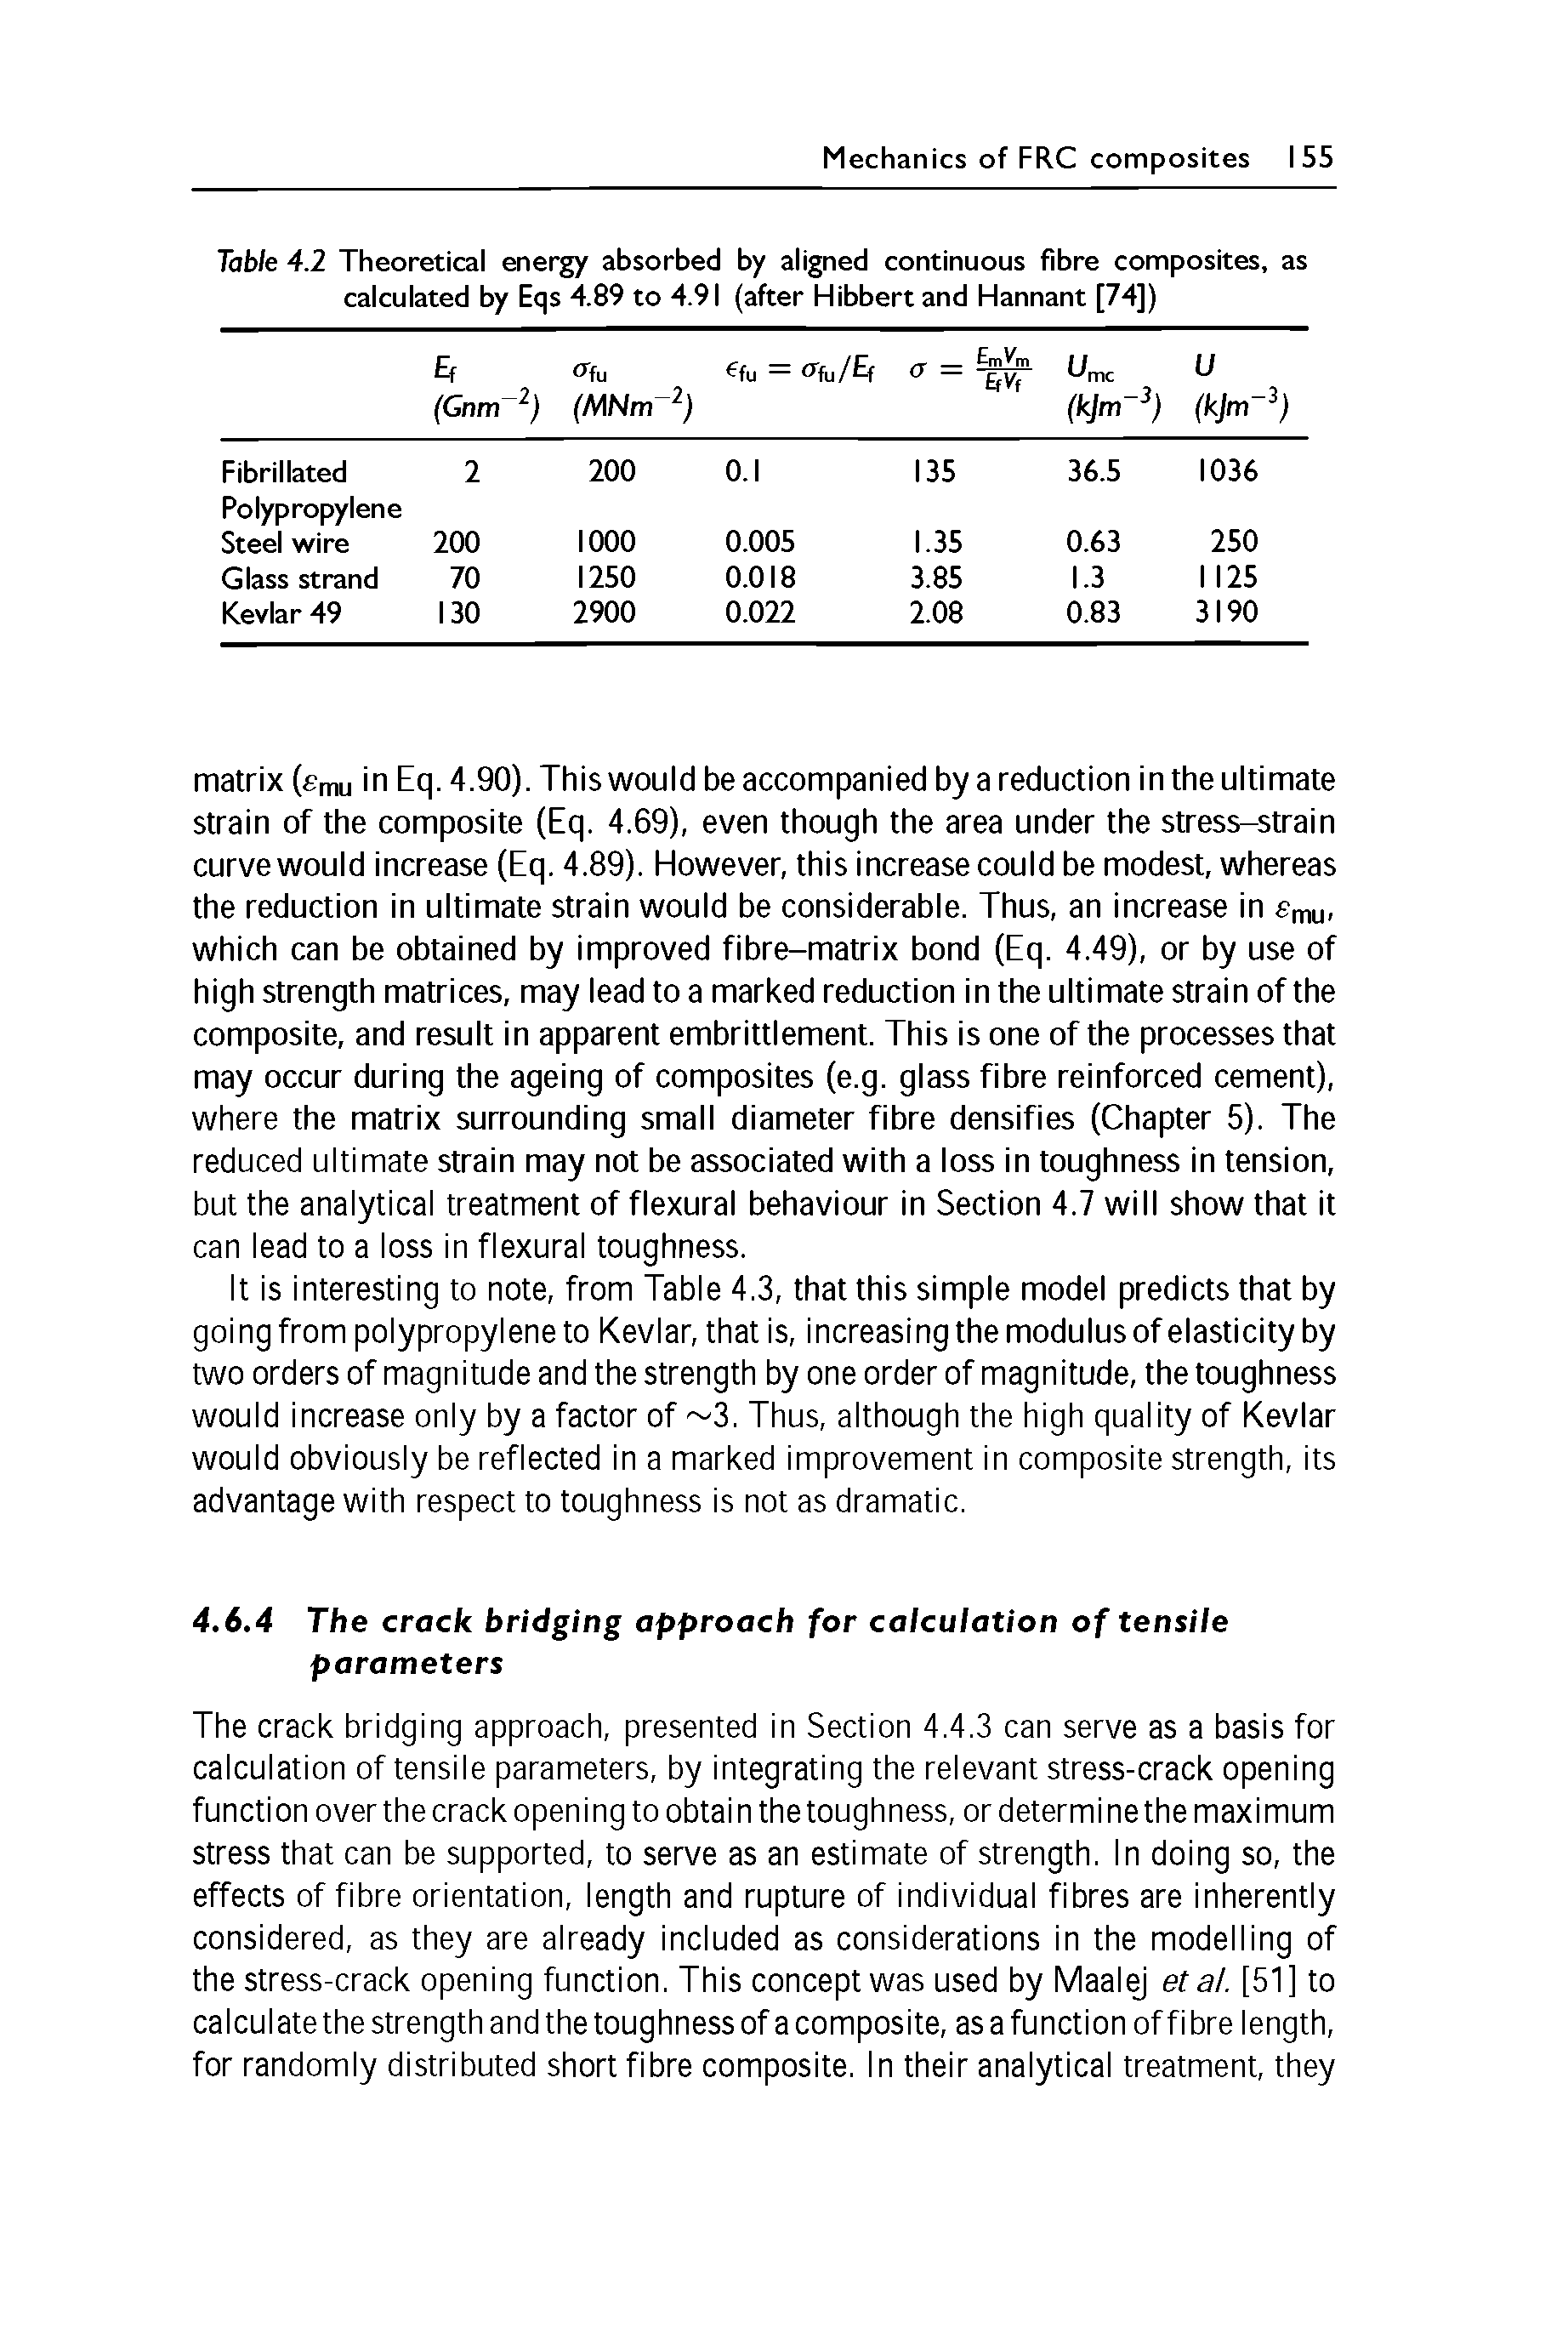 Table 4.2 Theoretical energy absorbed by aligned continuous fibre composites, as calculated by Eqs 4.89 to 4.91 (after Hibbert and Hannant [74]) ...